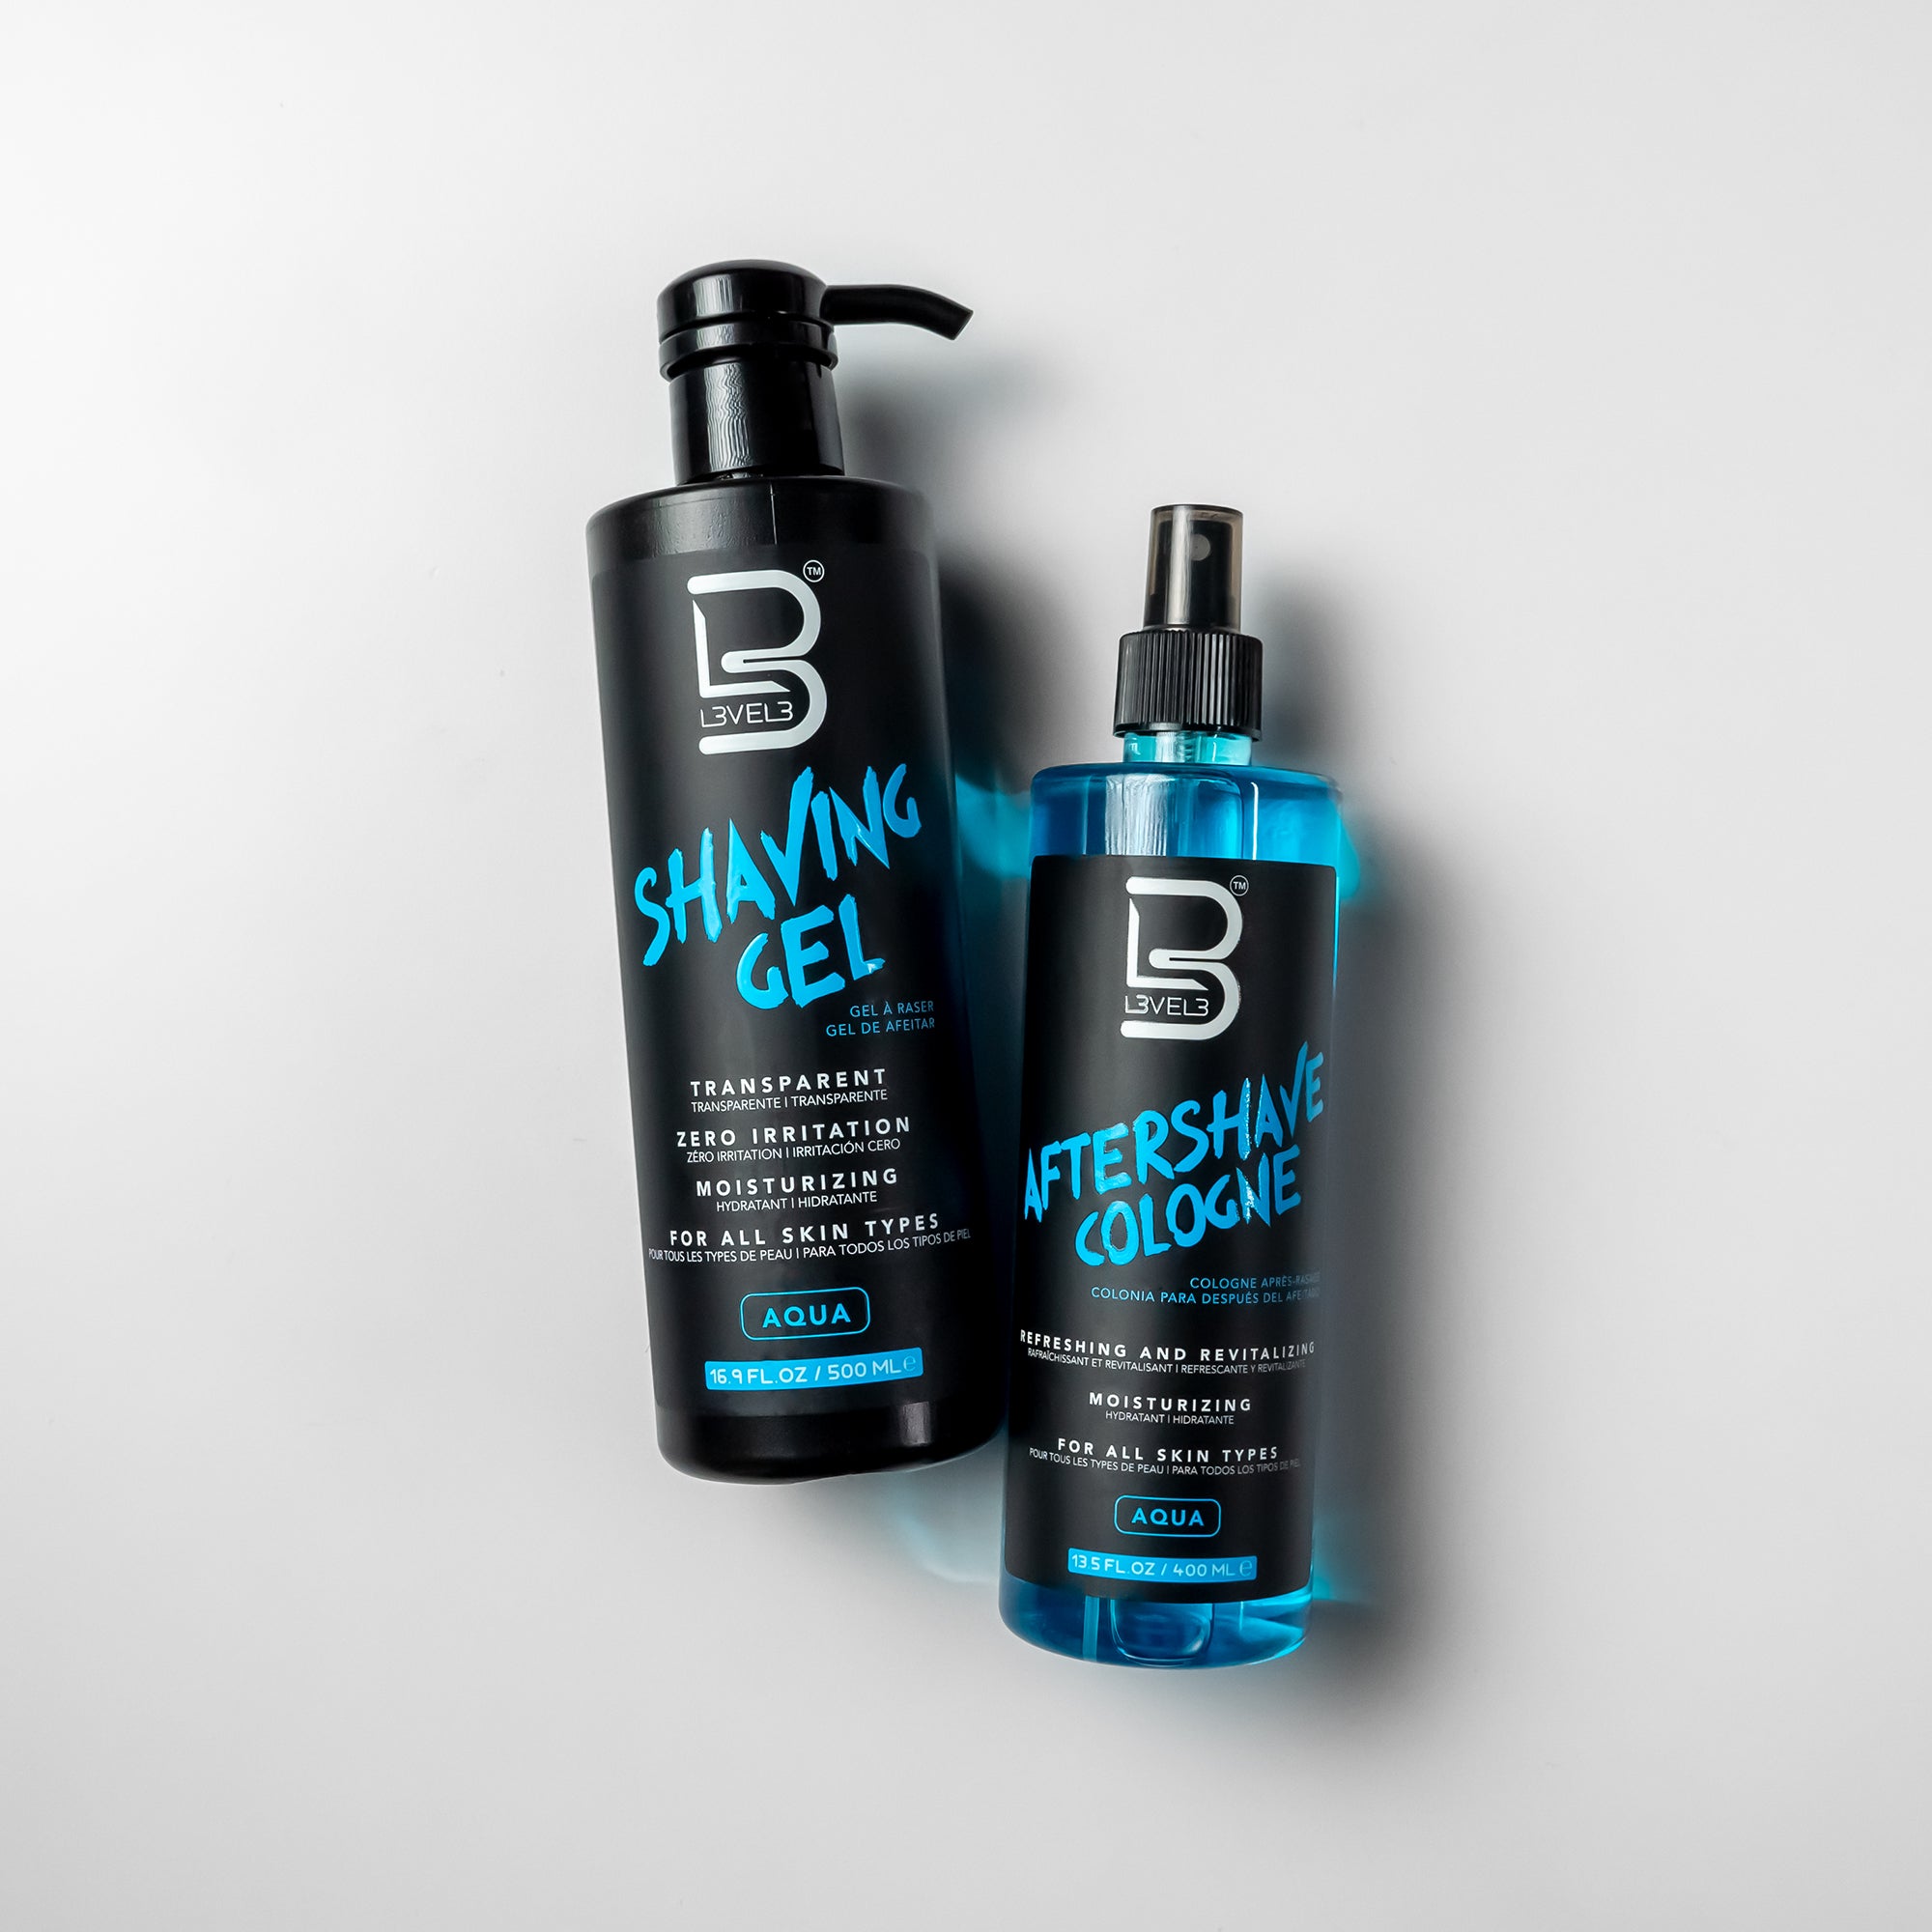 Shaving Gel & After Shave Kit, Hydrating and Refreshing